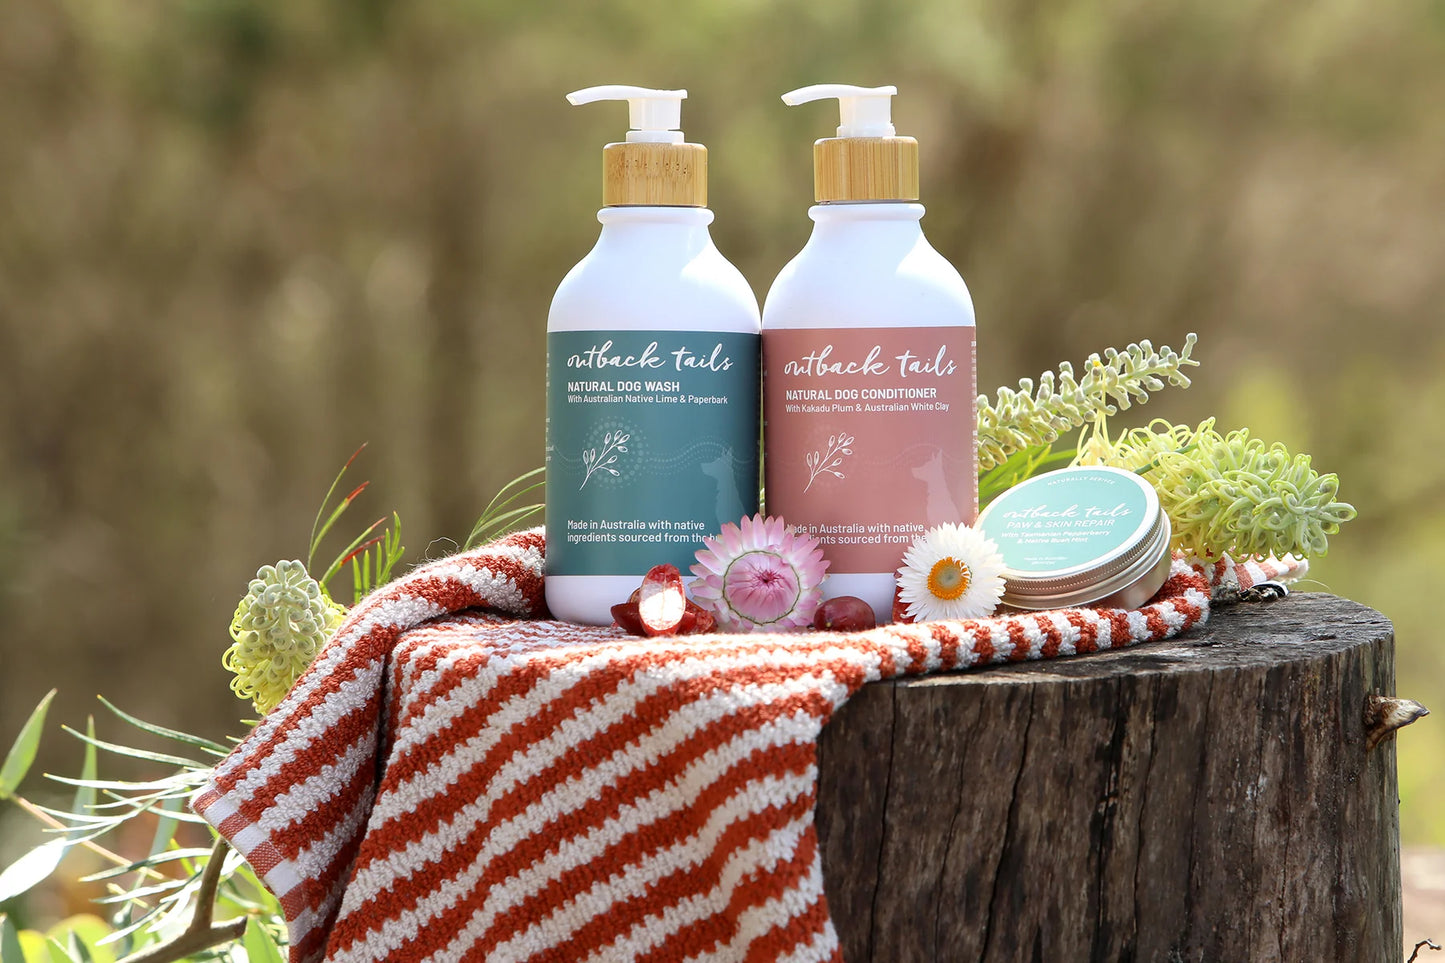 Outback Tails - Natural Dog Wash with Native Lime and Paperbark